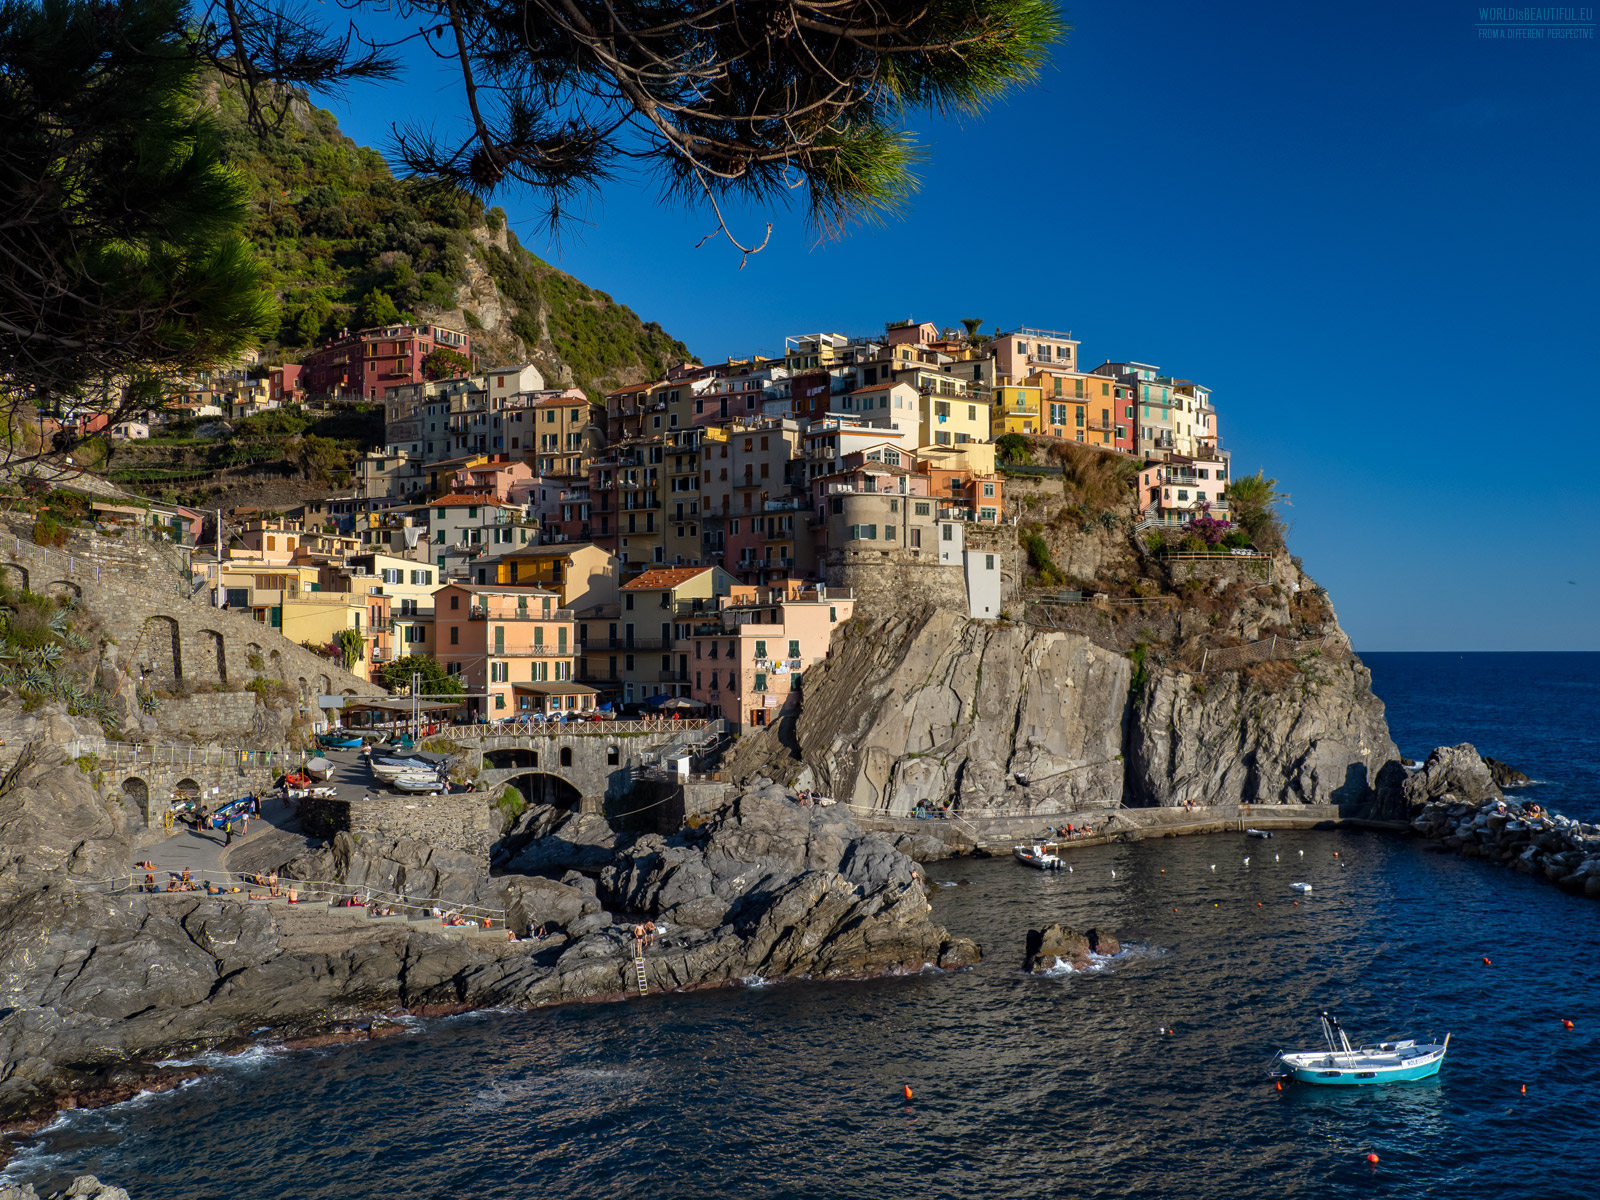 Manarola - photo from the viewpoint